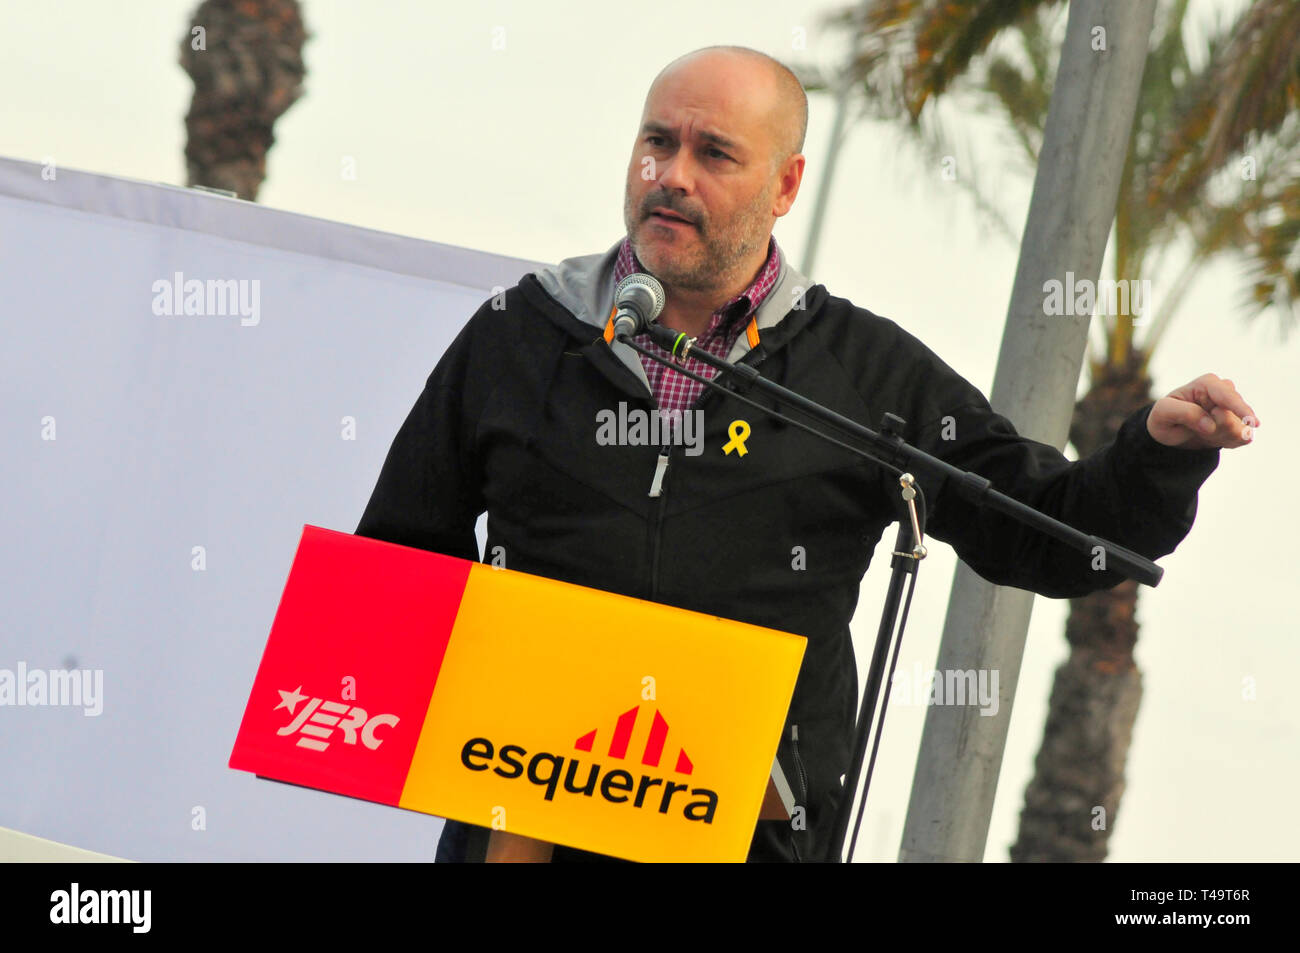 The candidate for the demarcation of Tarragona Jordi Salvador of ERC seen speaking during the parliaments of the political act at the electoral campaign for the next general elections in El Vendrell. Stock Photo